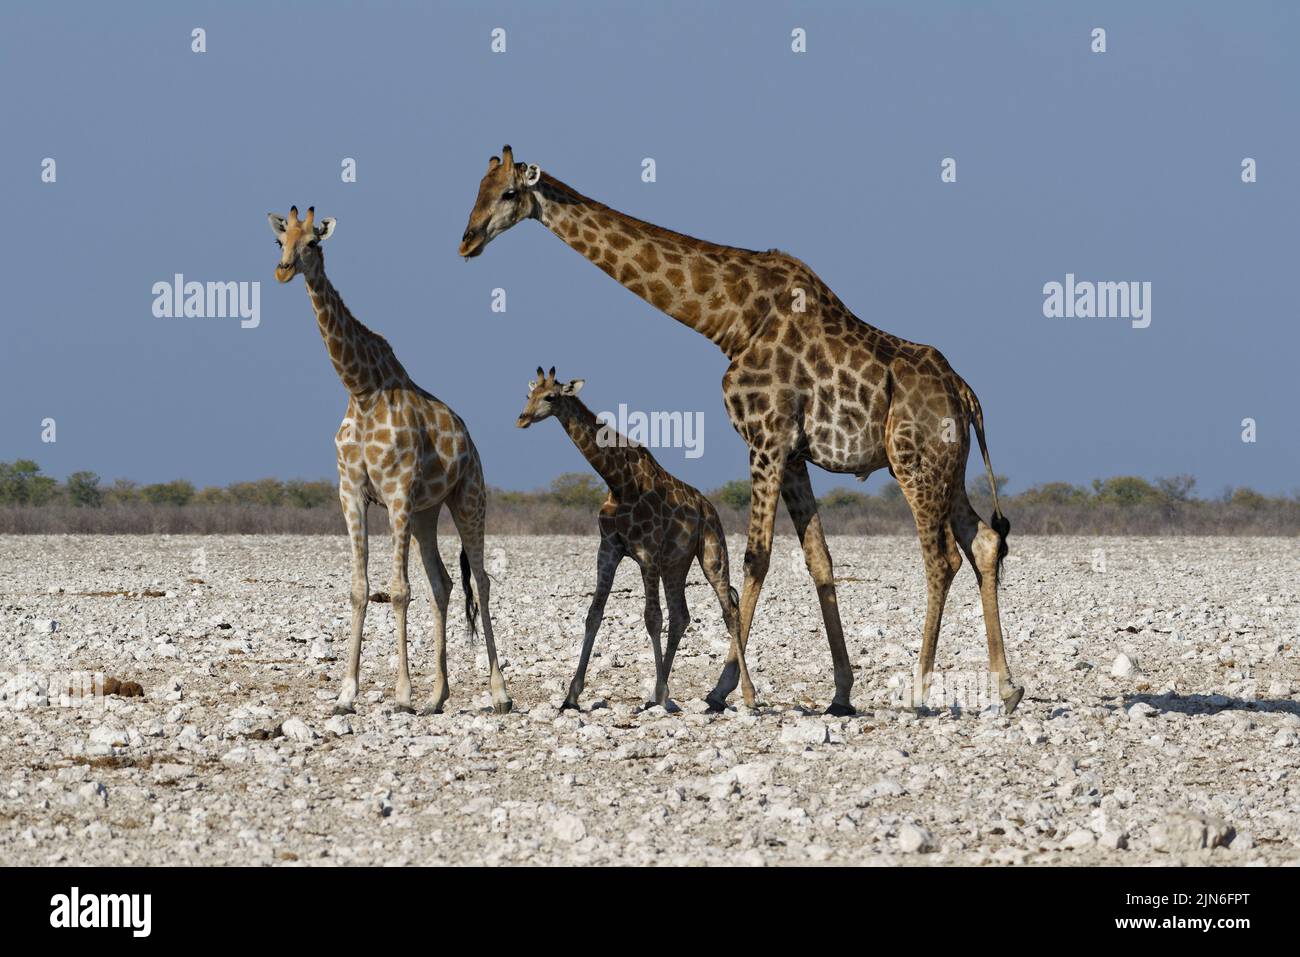 Angolan giraffes (Giraffa camelopardalis angolensis), adult male with young female and foal, on arid ground, Etosha National Park, Namibia, Africa Stock Photo